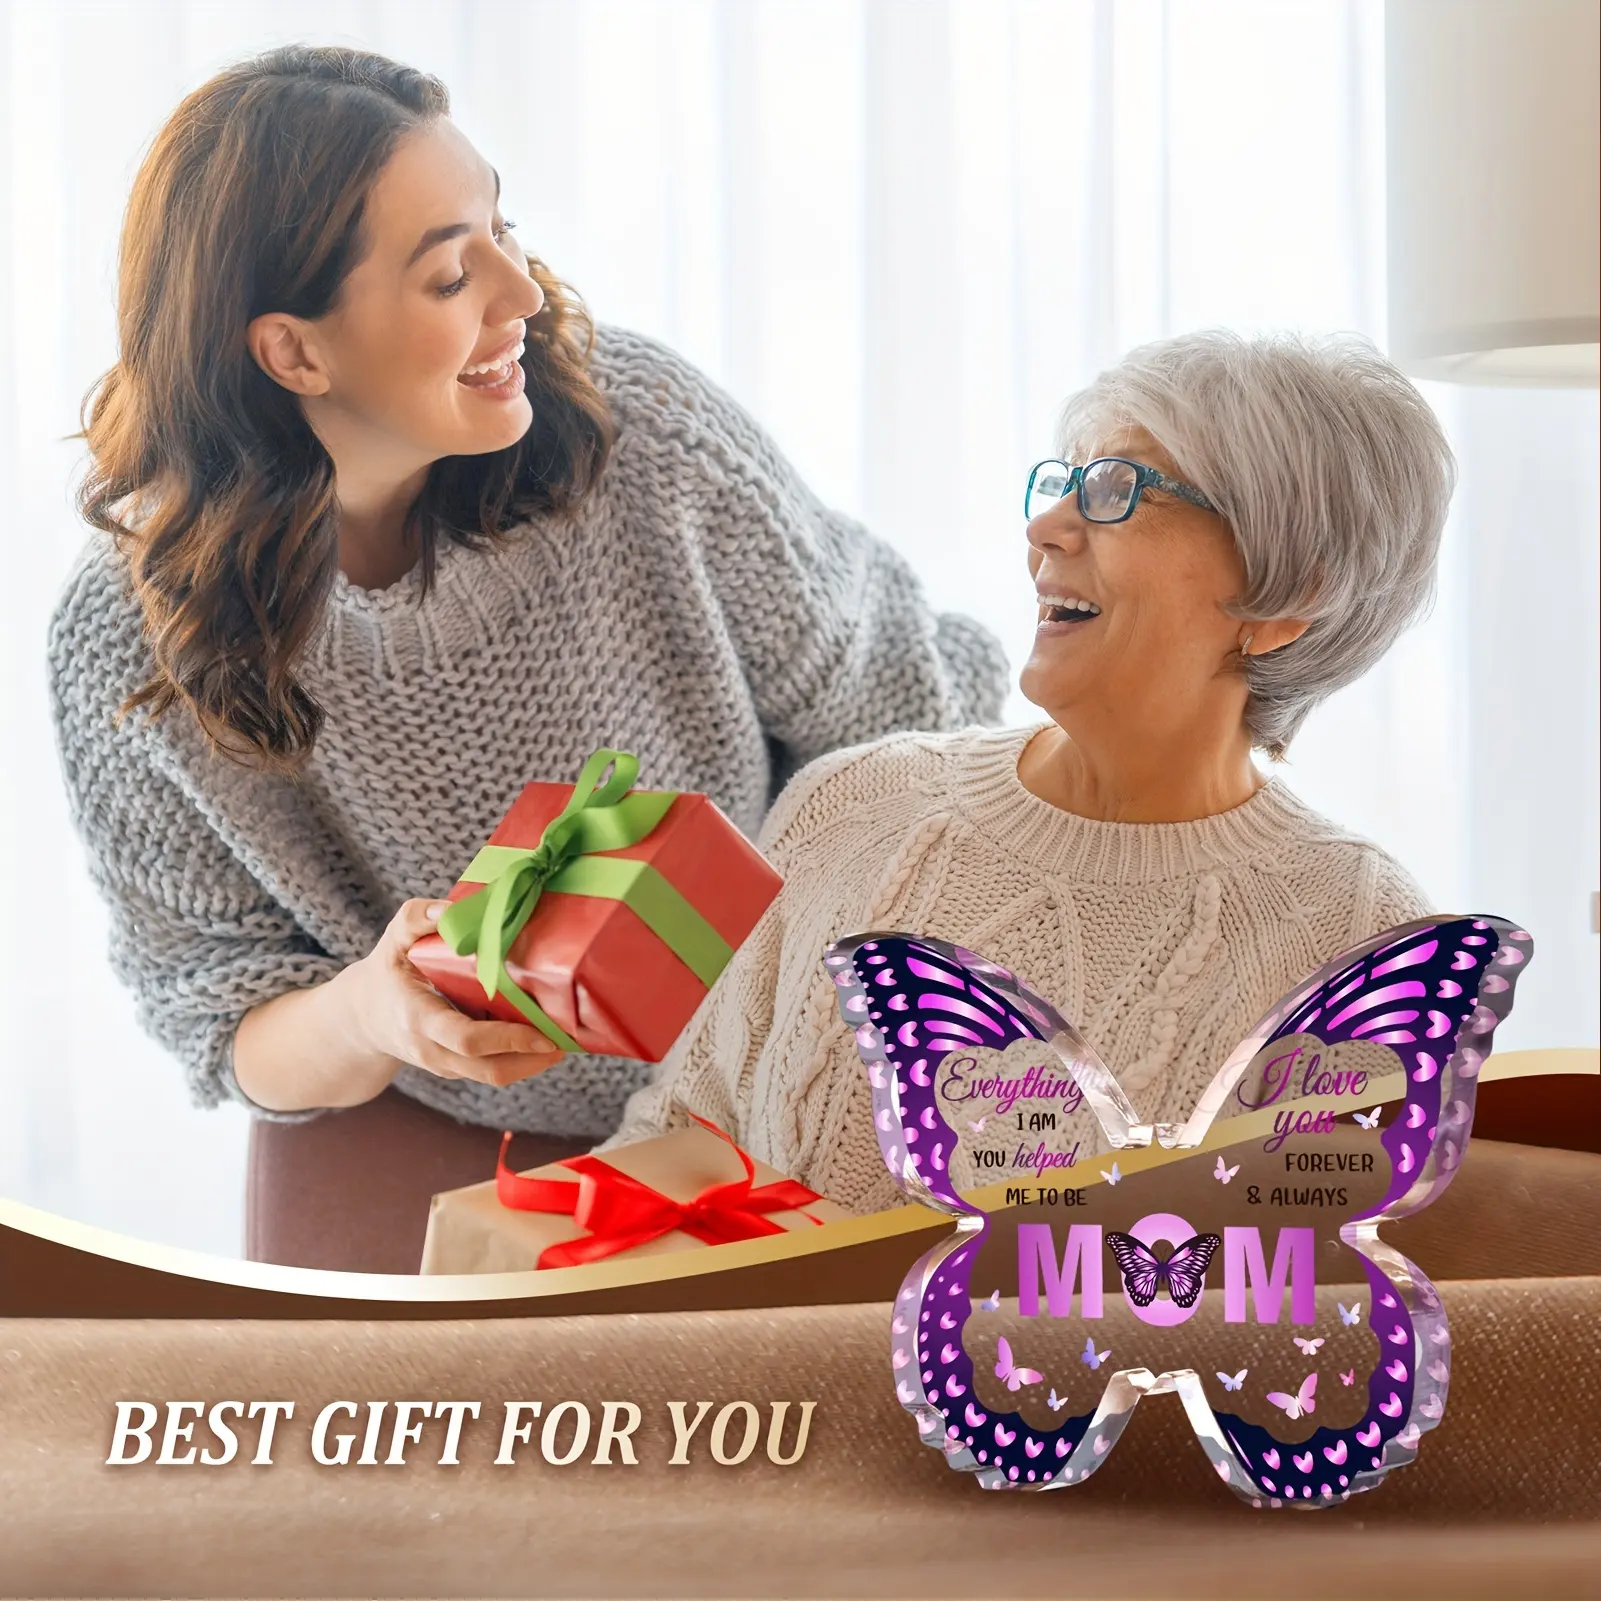 Acrylic desktop butterfly decorations party gifts holiday gifts Christmas gifts party decorations table decorations